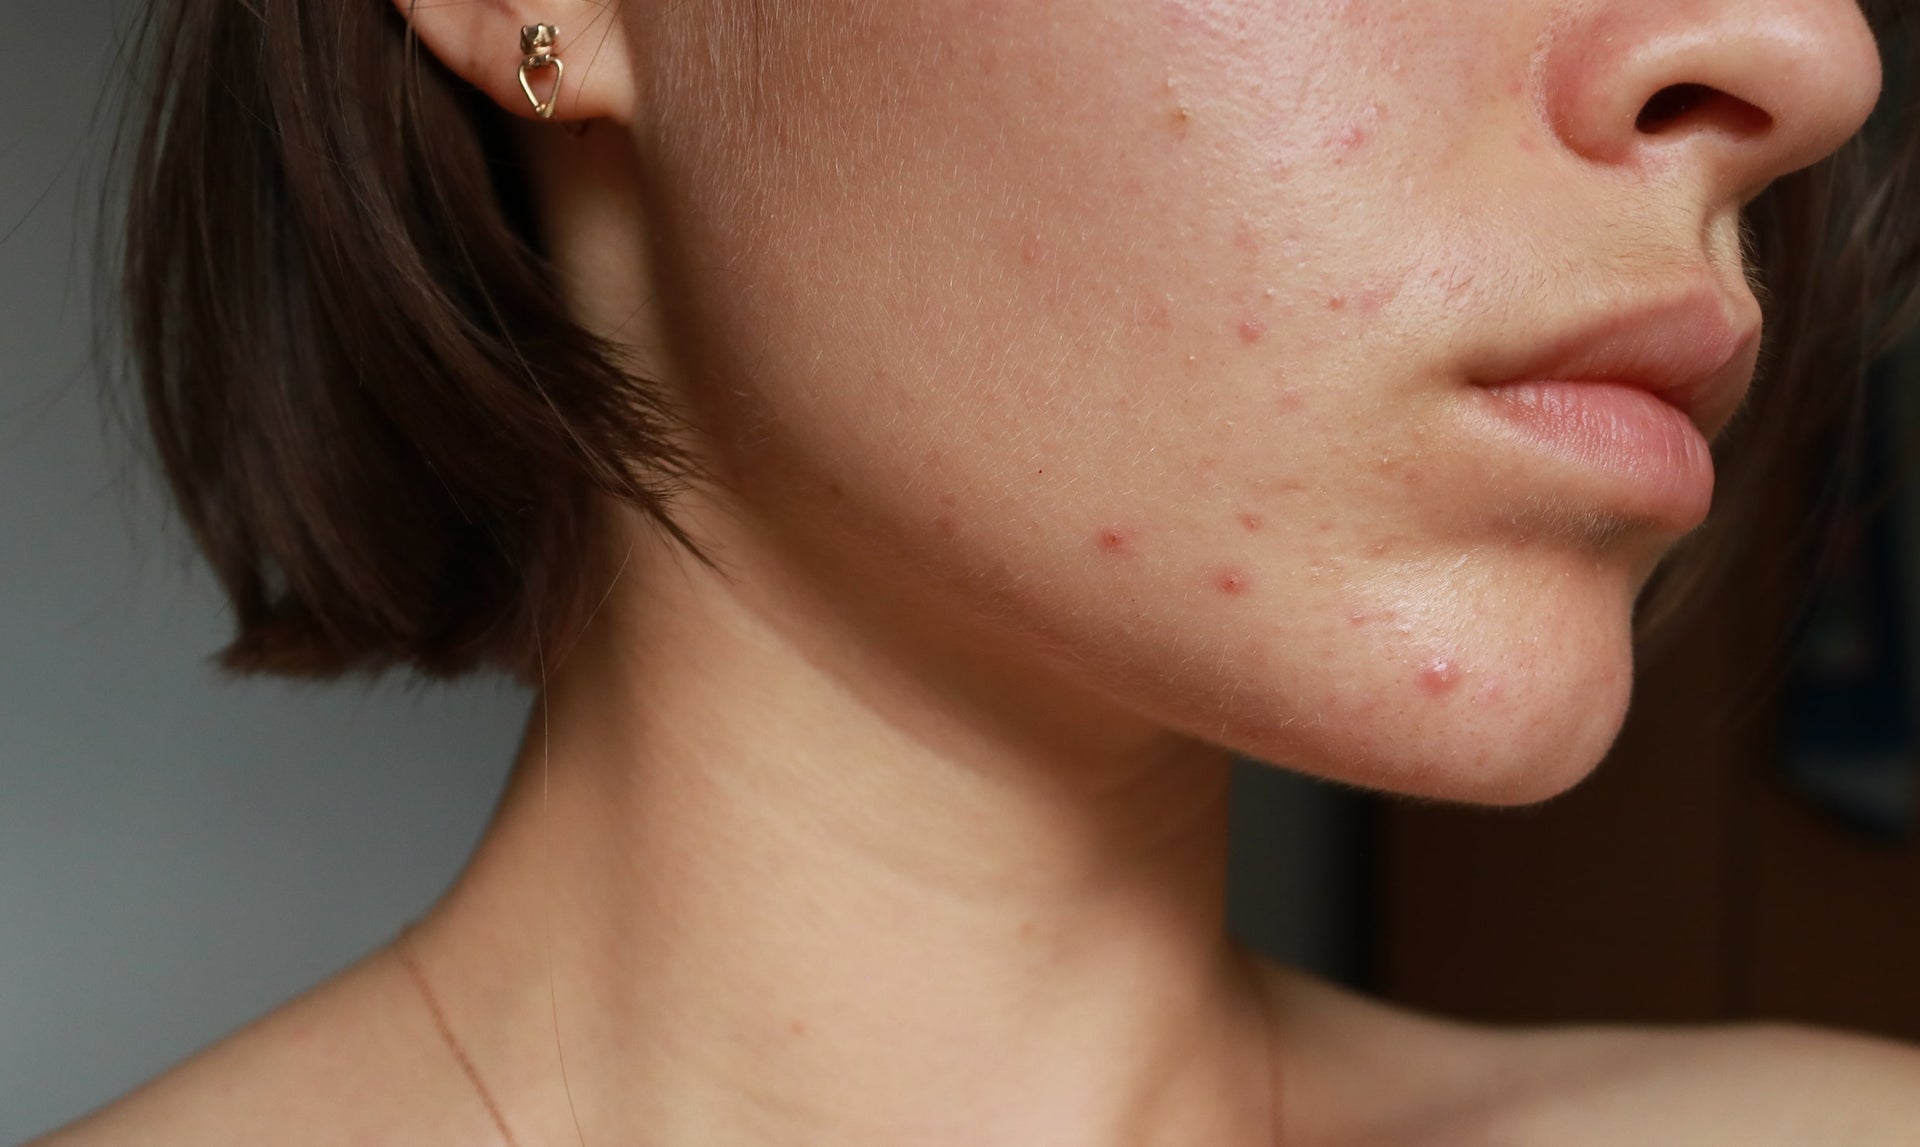 How Do I Know If My Acne Is Hormonal?